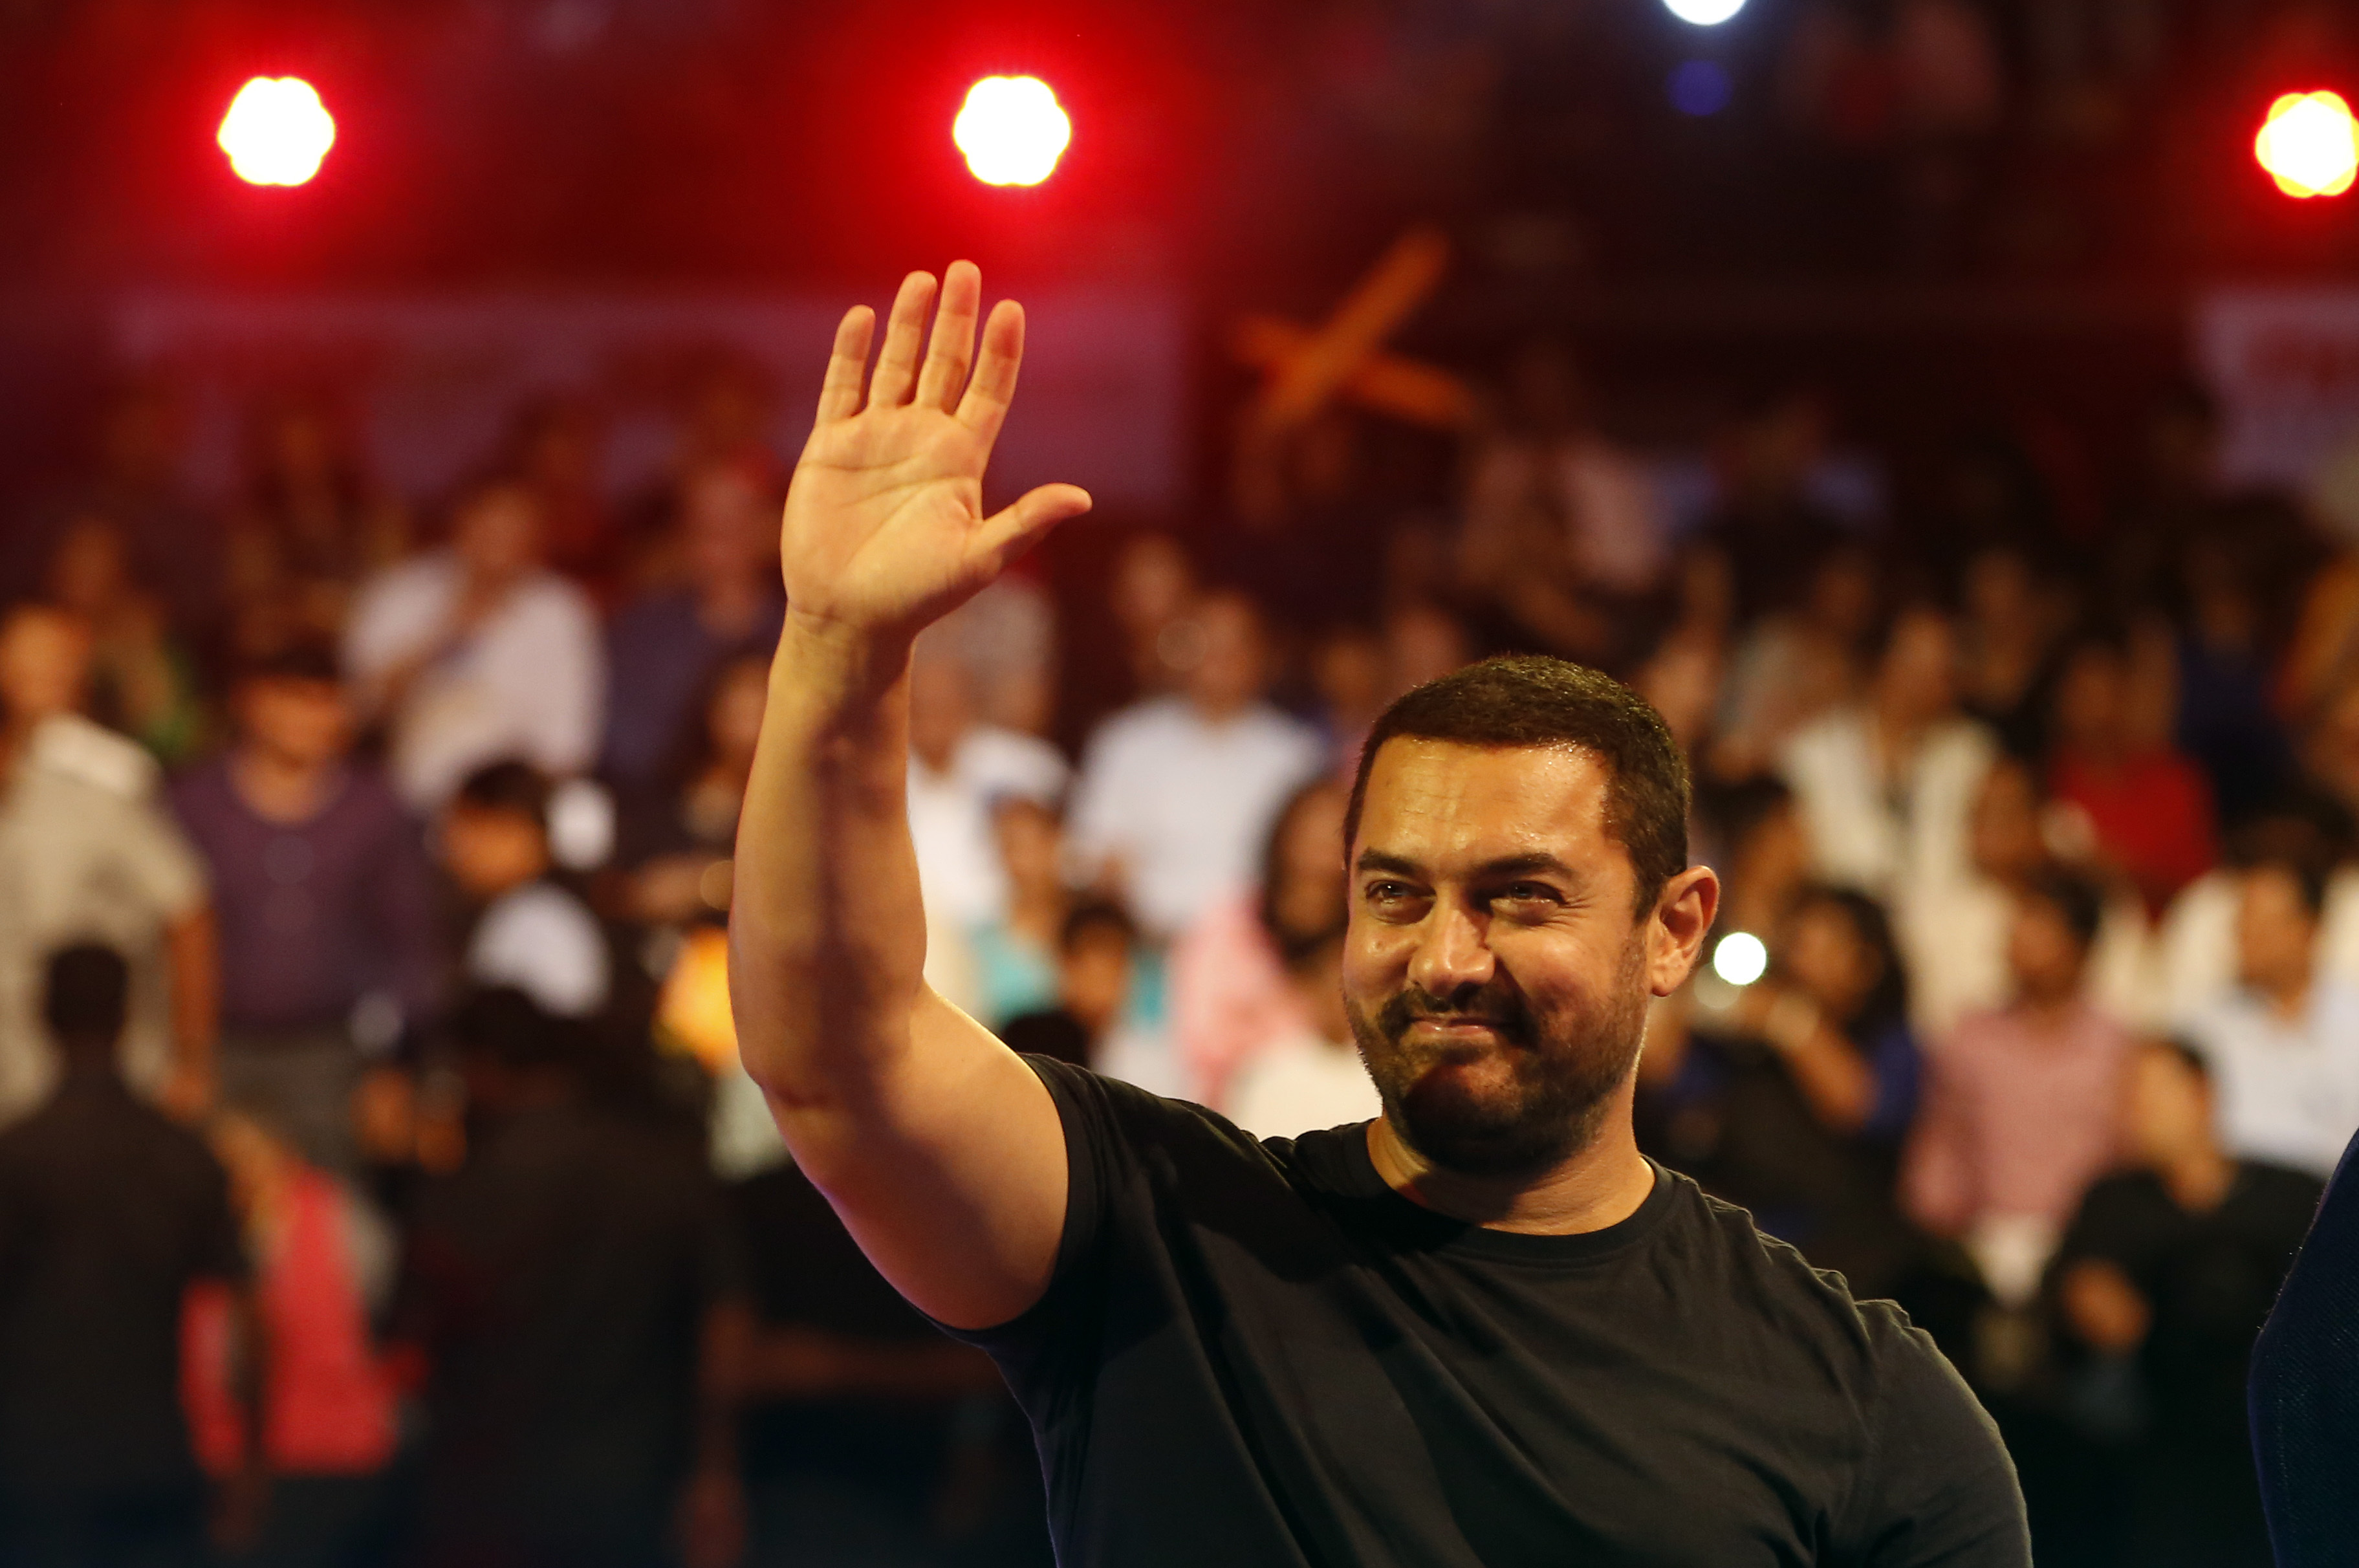 Bollywood actor Aamir Khan waves to the crowd as he attends the inaugural session of Pro Kabaddi League 2015 in Mumbai on July 18, 2015 (Rajanish Kakade—AP)